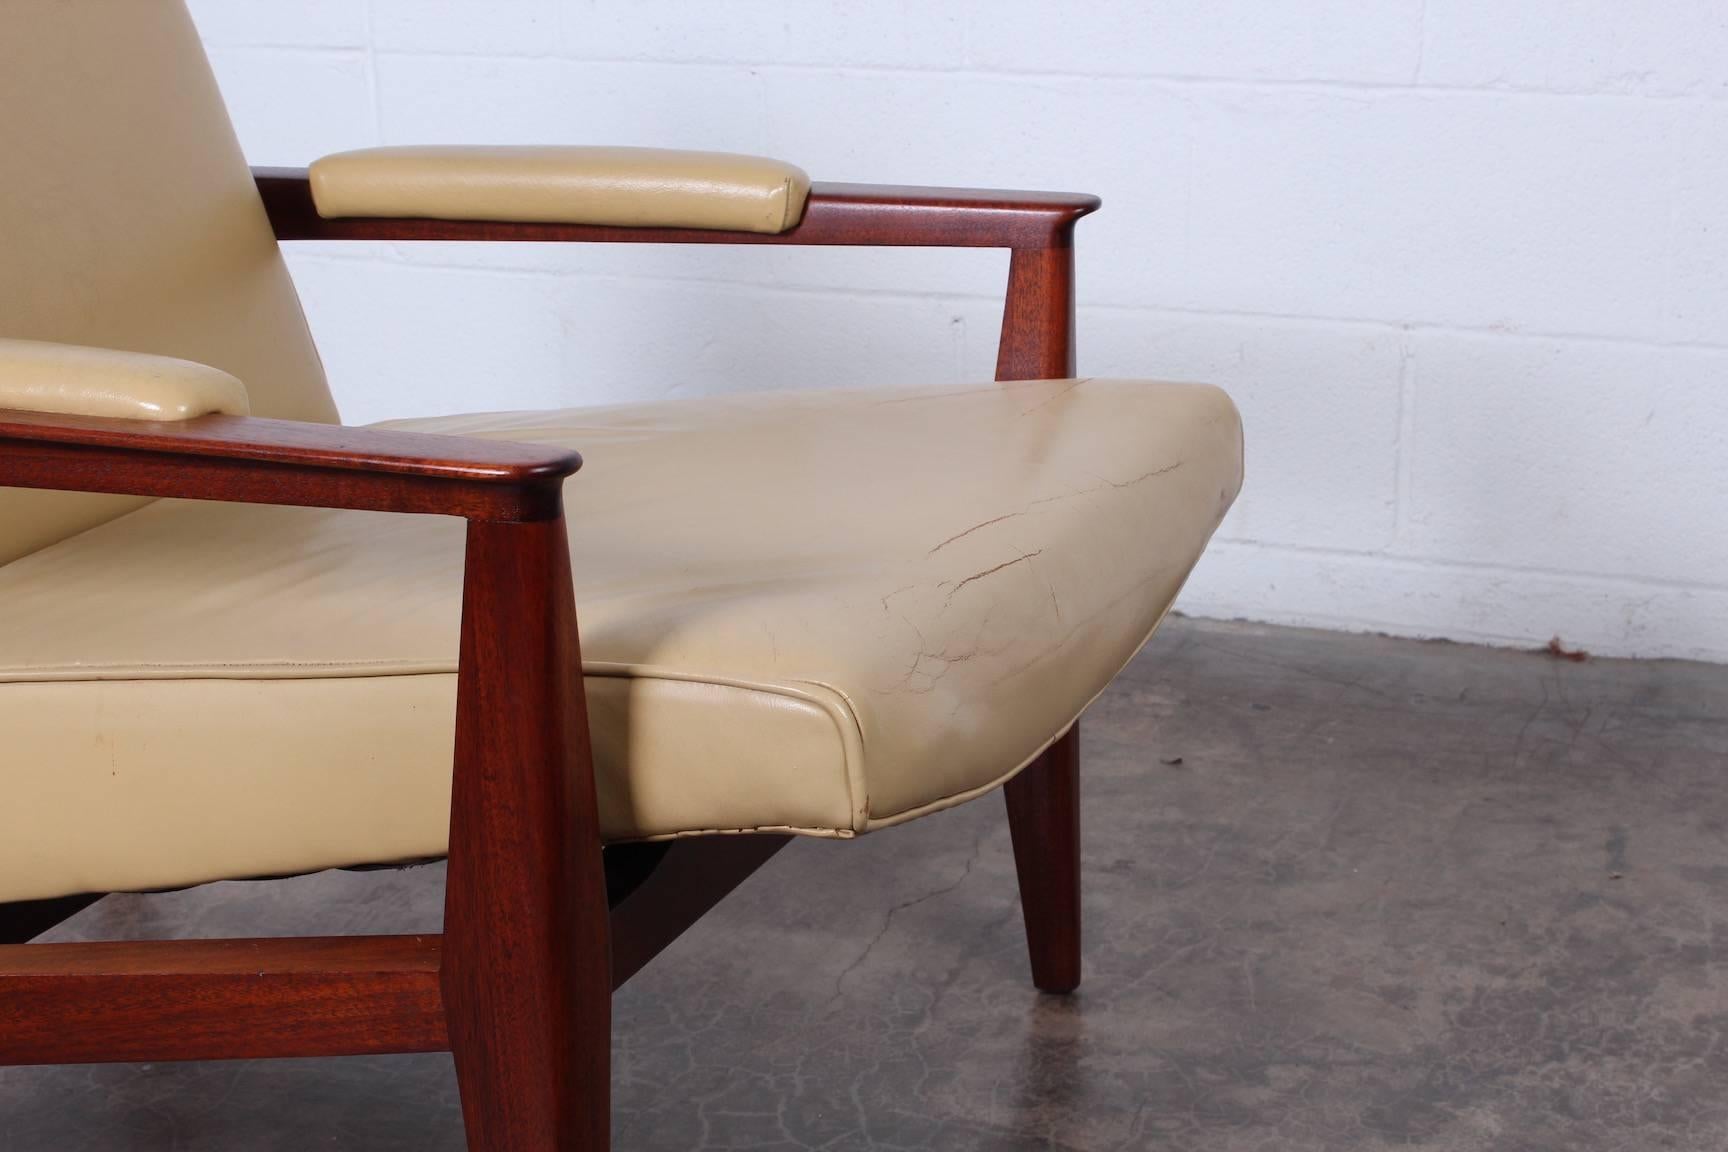 Mid-20th Century Lounge Chair by Edward Wormley for Dunbar